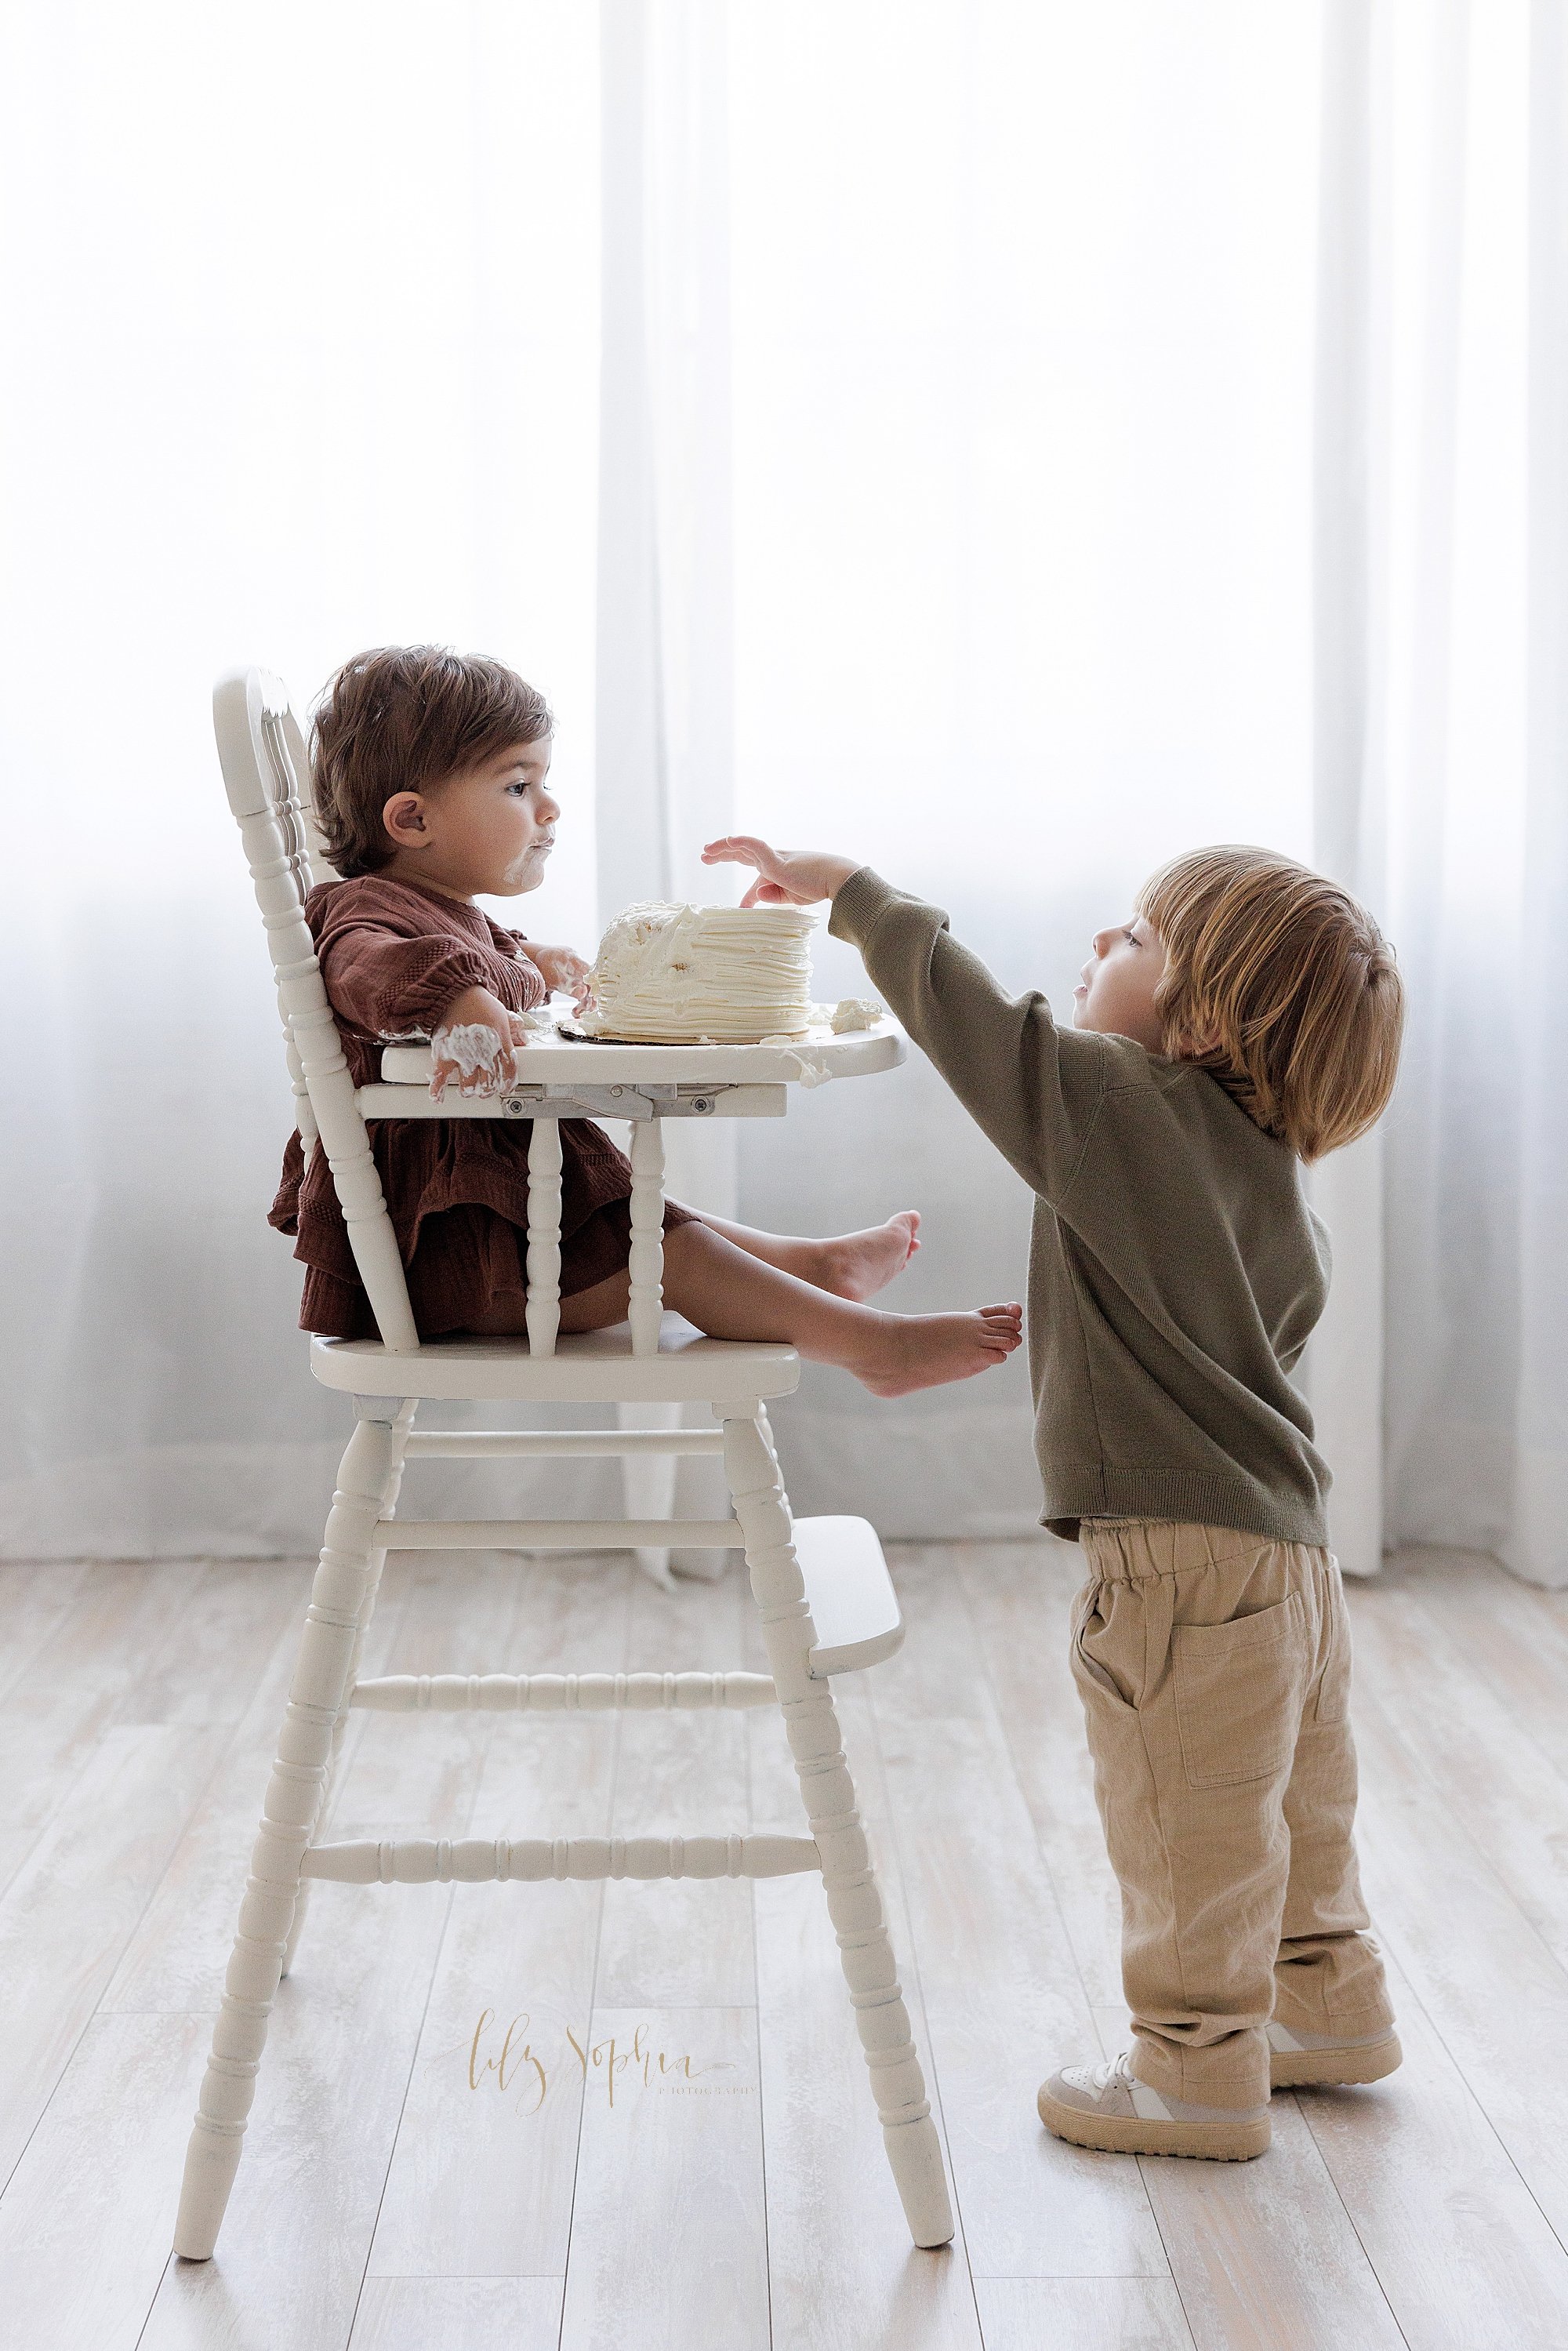  Sibling smash cake photo of a one year old girl sitting in an antique high chair with her smash cake on the tray watching her older brother reach to get a bite of icing taken in front of a window streaming natural light near Buckhead in Atlanta in a